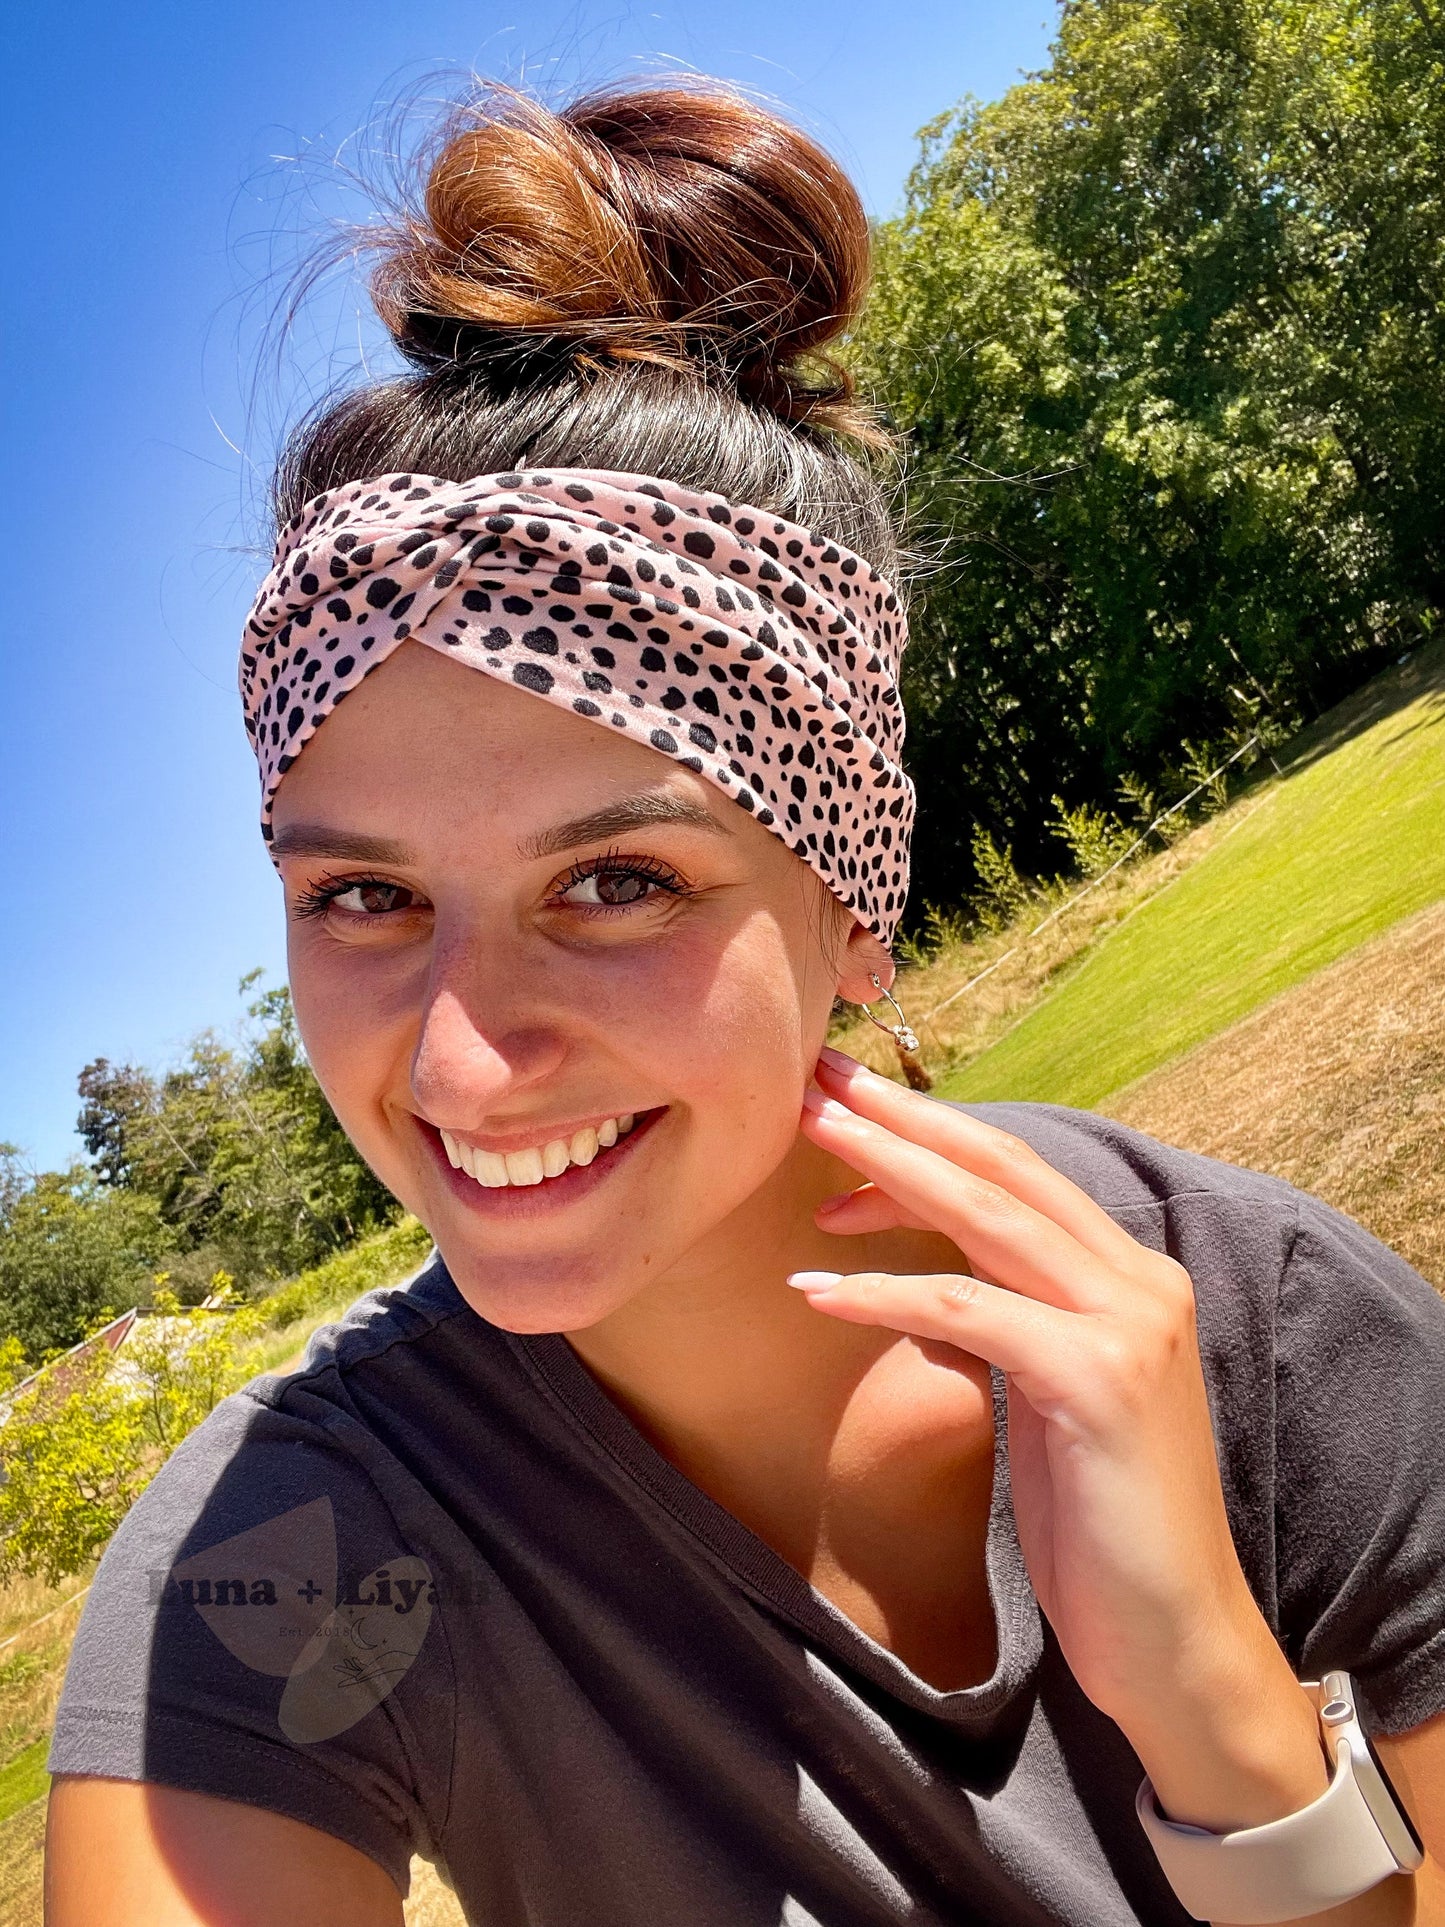 DBP Twisted Headband - Brown With Black Spots - Adult Size